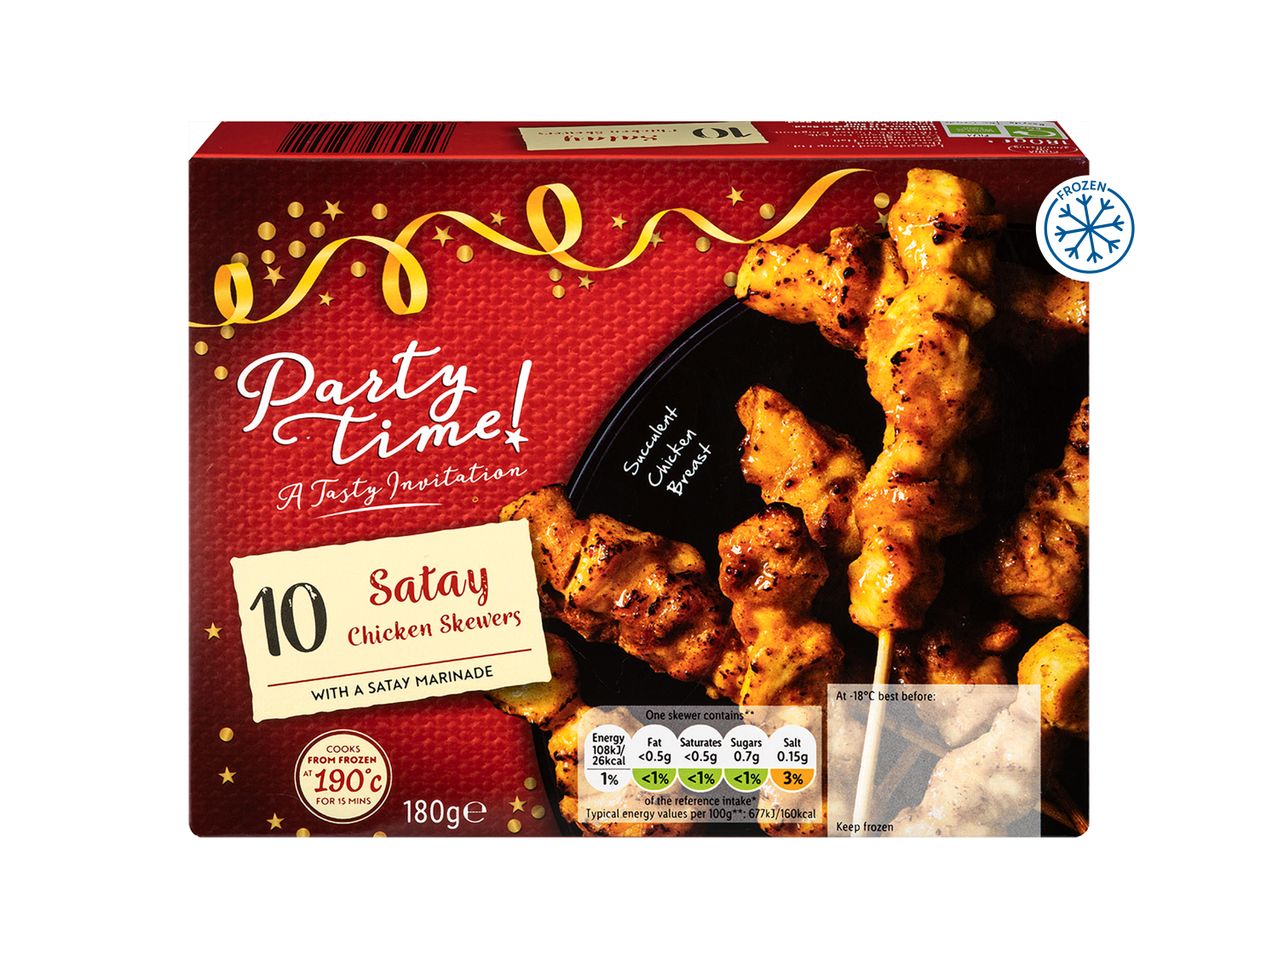 Go to full screen view: Partytime Chicken Breast Skewers - Image 1